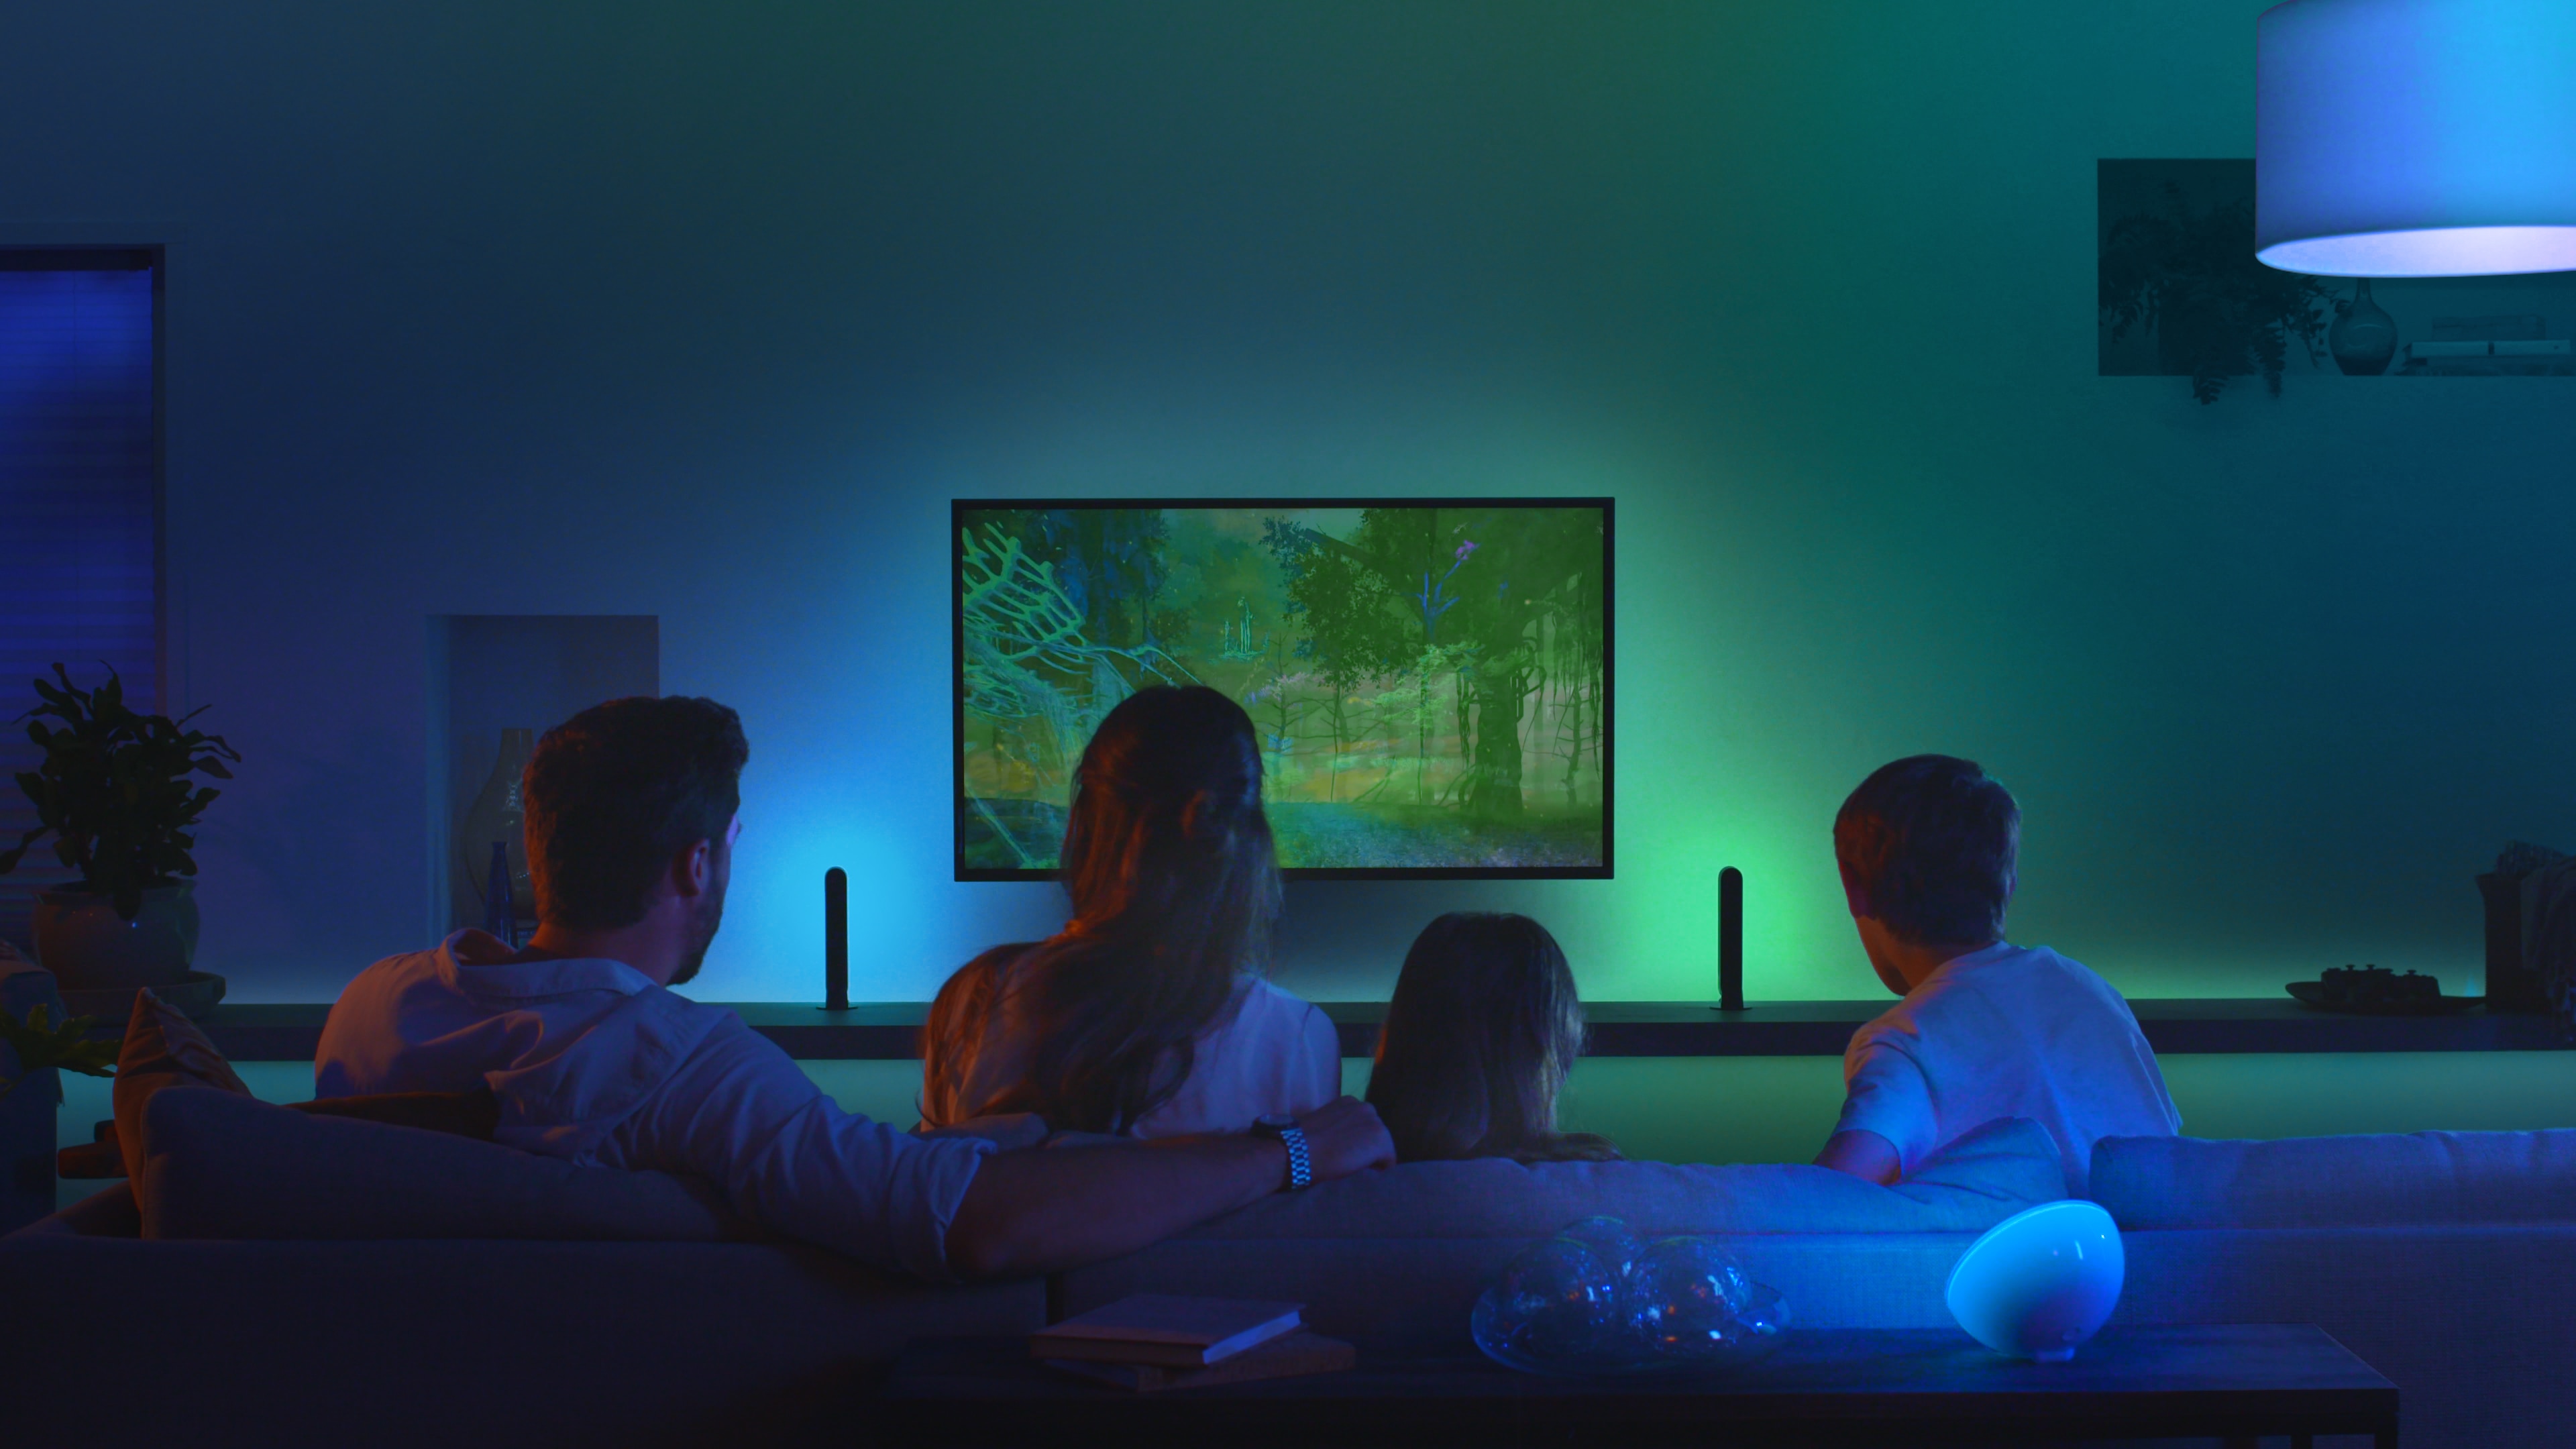 Grab the popcorn! Take your home entertainment to the next level with the  Philips Hue Play HDMI Sync Box